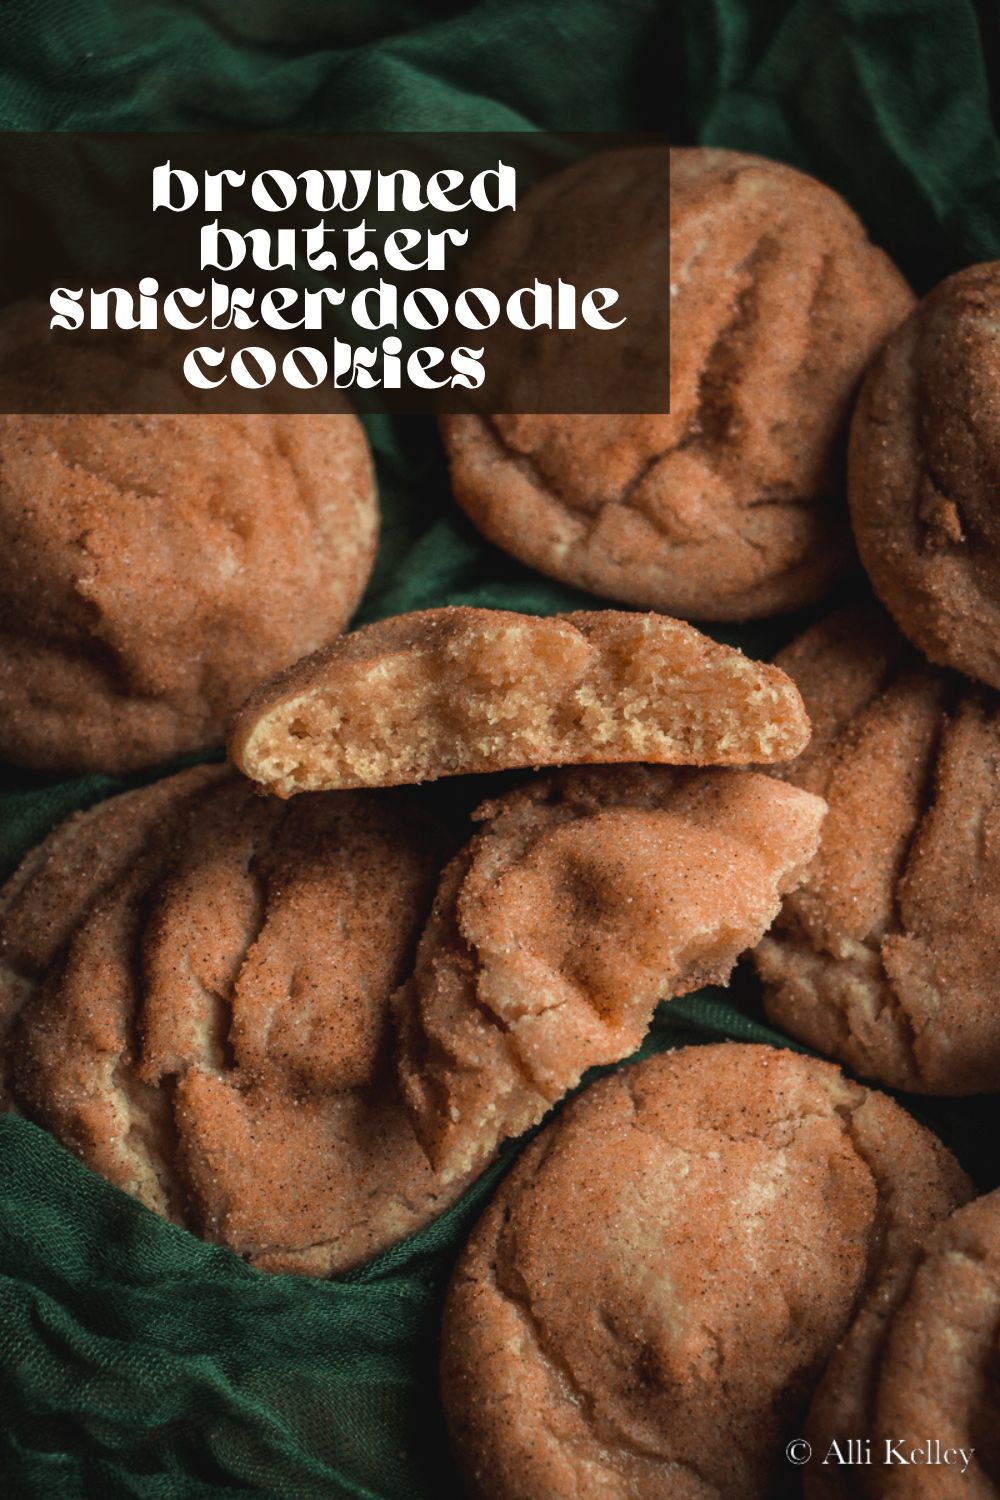 Browned Butter Snickerdoodles are an incredible twist on an old classic. A nutty, buttery, flavor combined with cinnamon and sugar make these amazing! #snickerdoodles #snickerdoodlerecipe #classicsnickerdoodles #chewysnickerdoodles #snickerdoodlecookies #softsnickerdoodles #easysnickerdoodles #bestsnickerdoodles #brownedbutter #brownedbuttersnickerdoodles #brownedbuttercookies